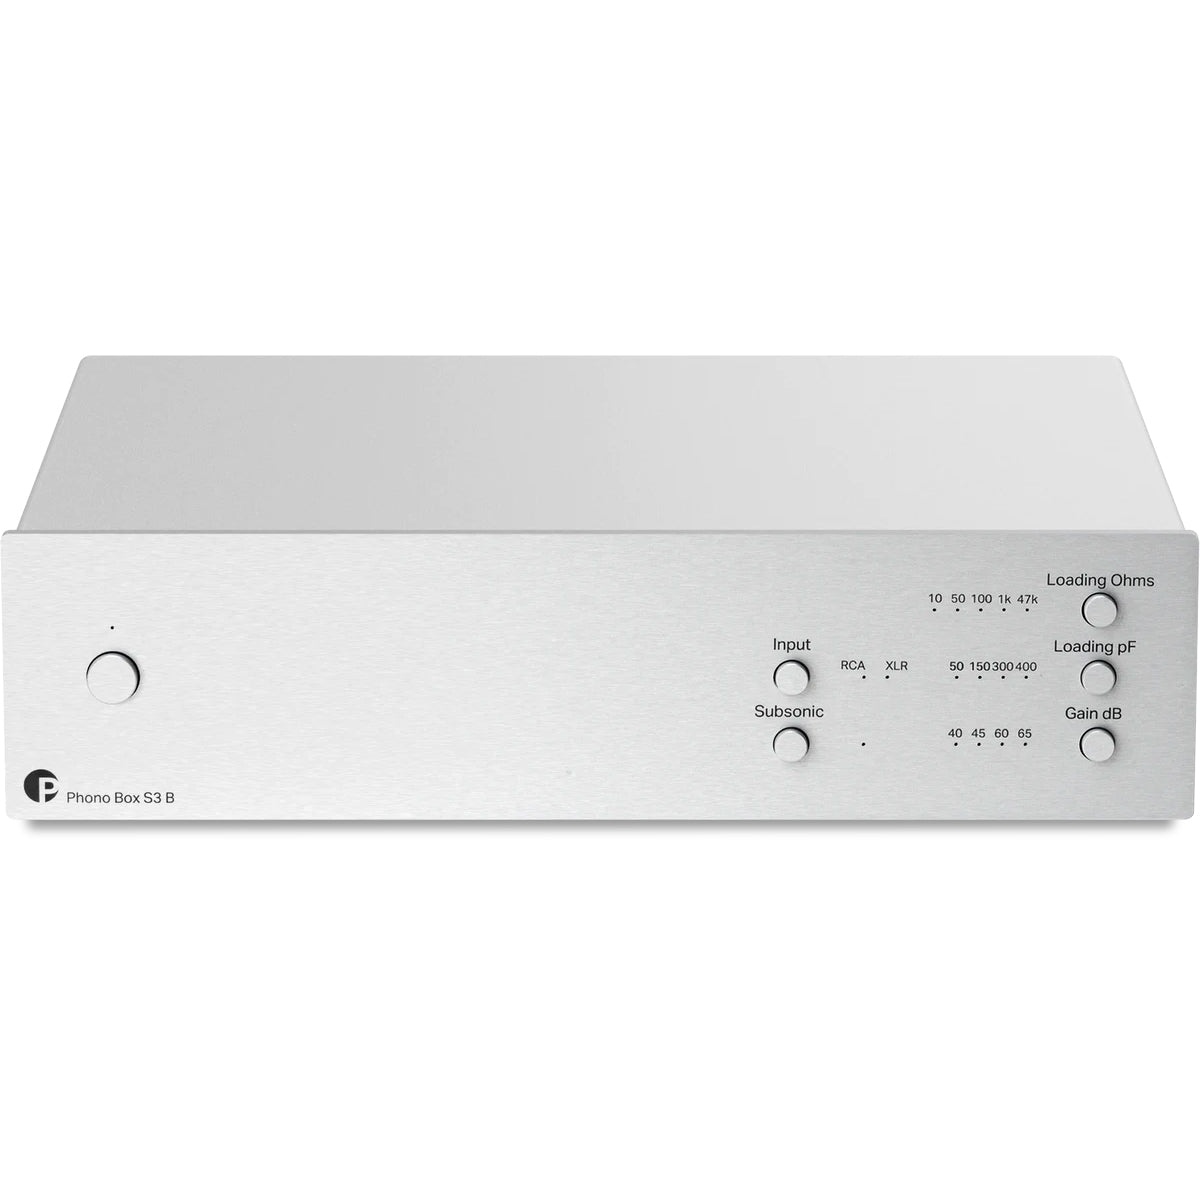 Pro-Ject Phono Box S3 B Phono Preamplifier - Silver - The Audio Experts